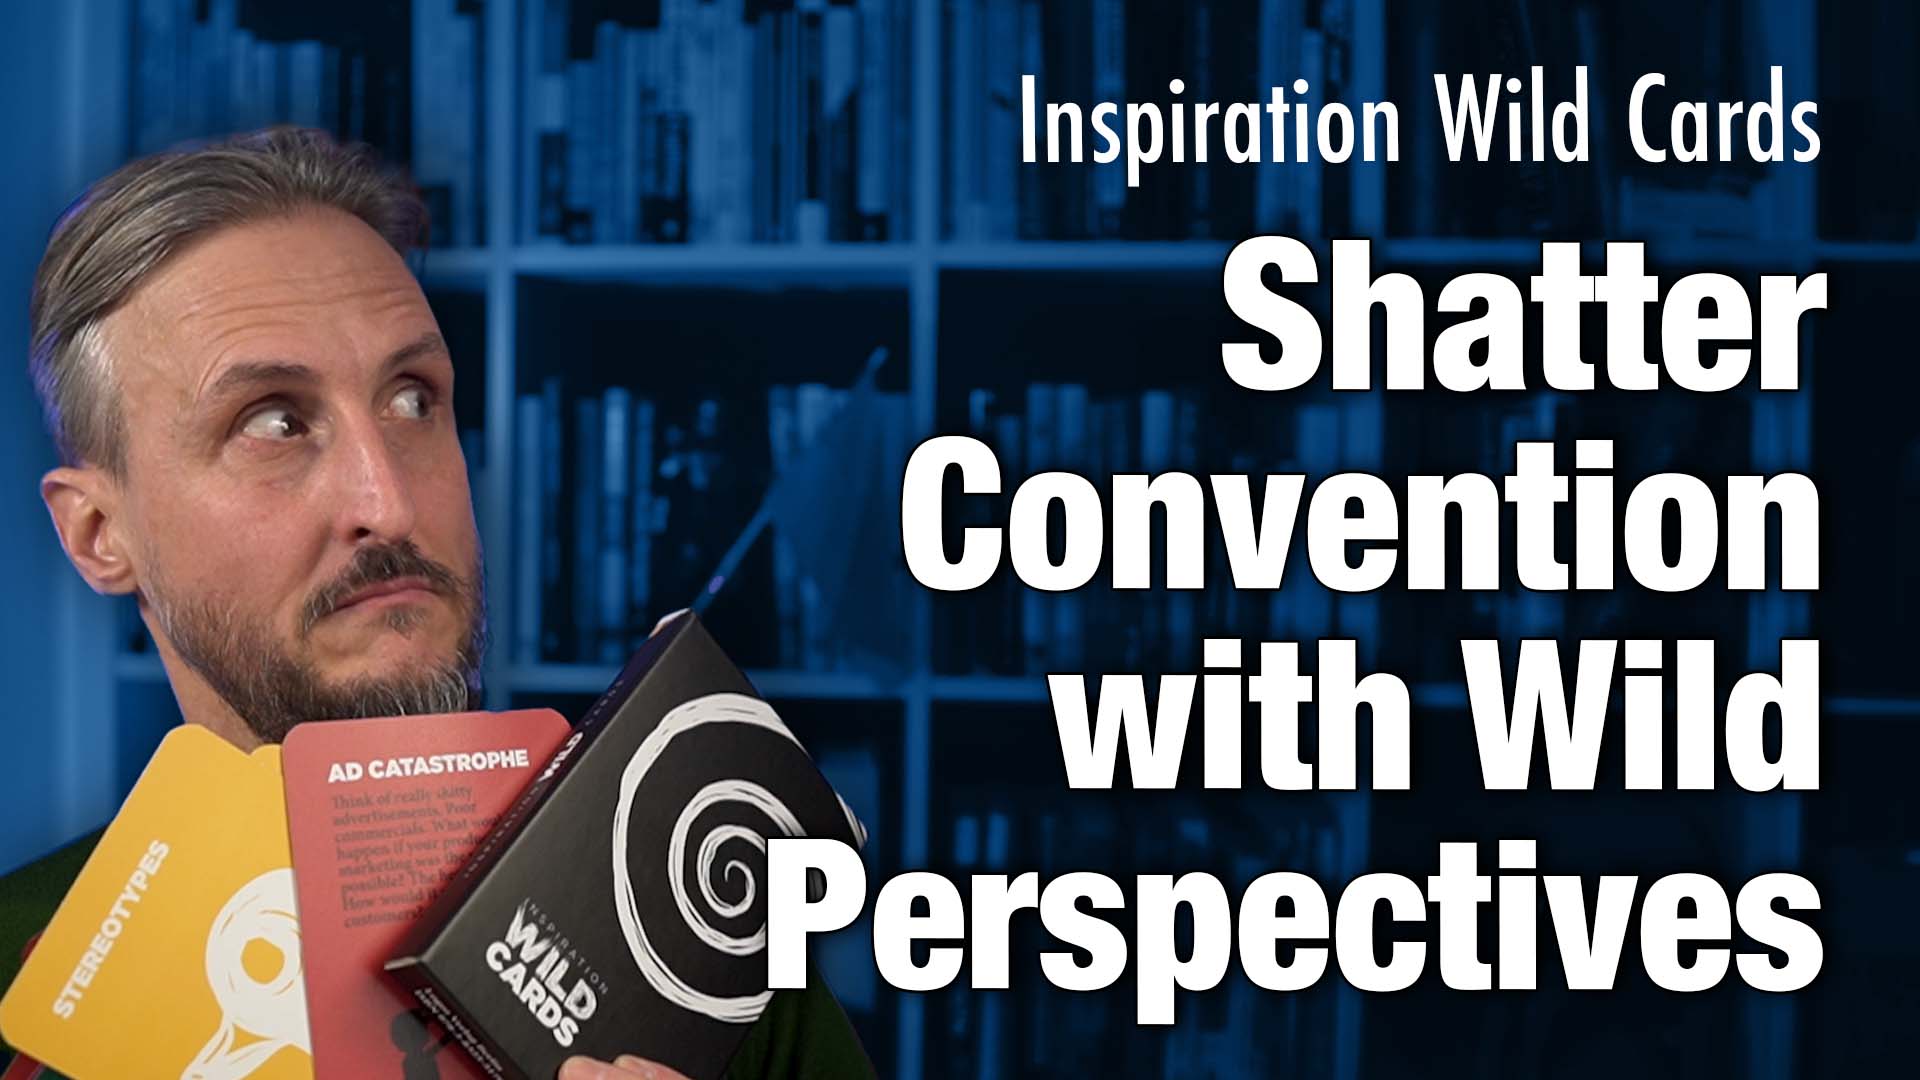 Inspiration Wild Cards: Shatter Convention with Wild Perspectives